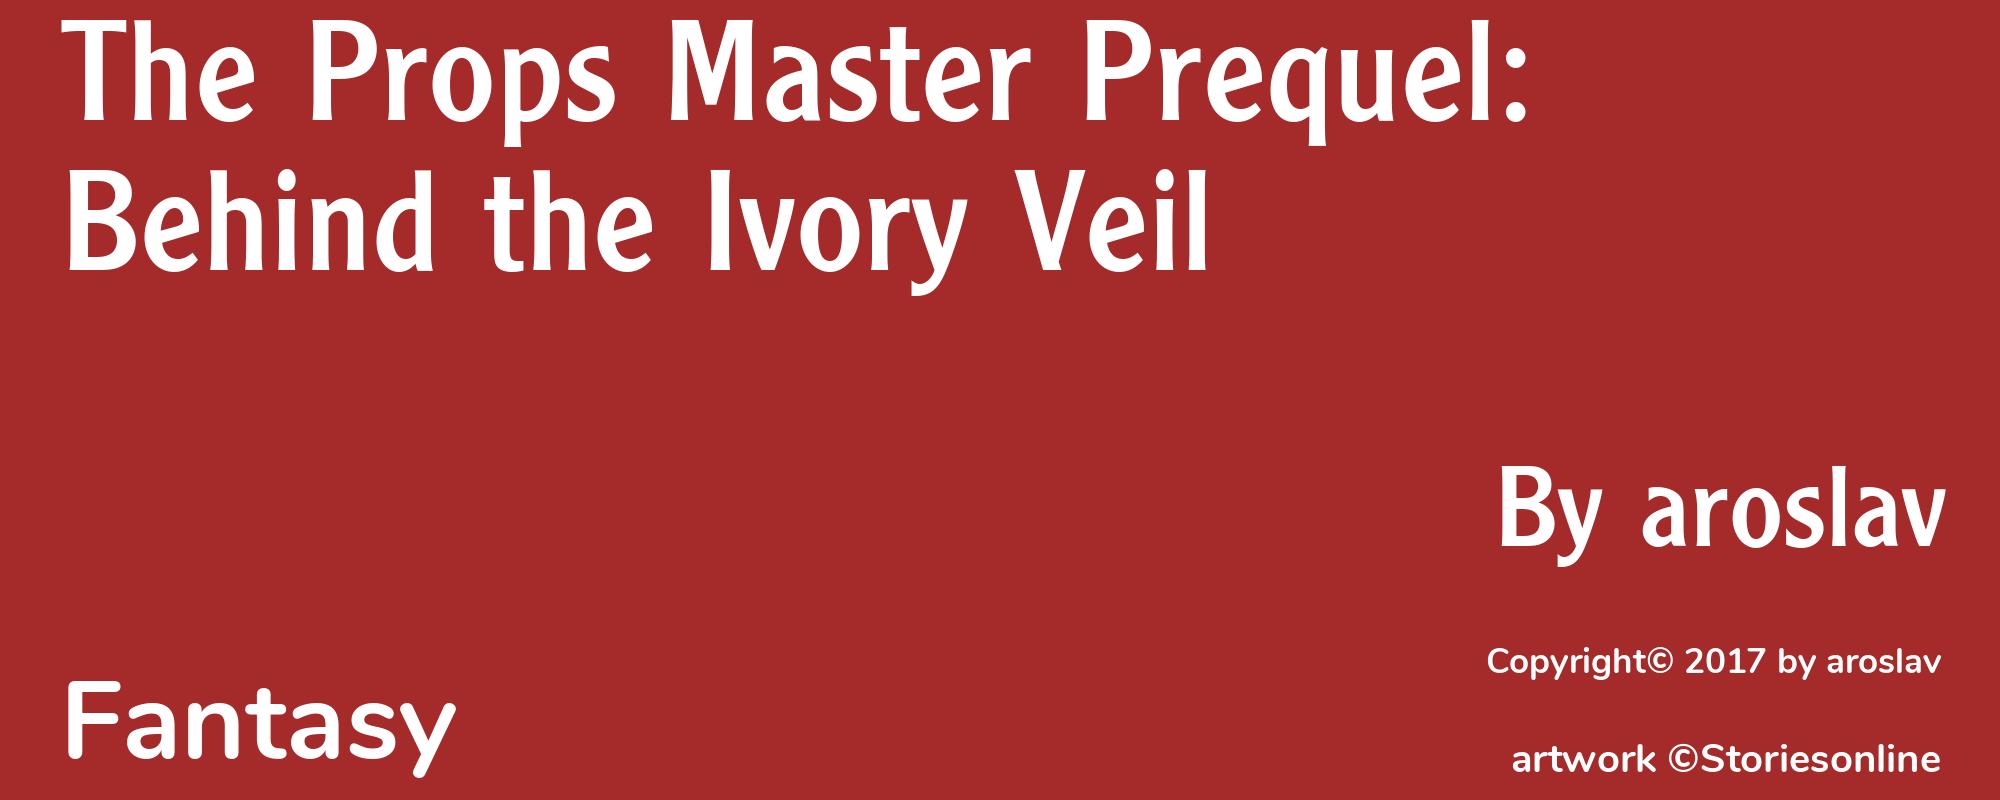 The Props Master Prequel: Behind the Ivory Veil - Cover